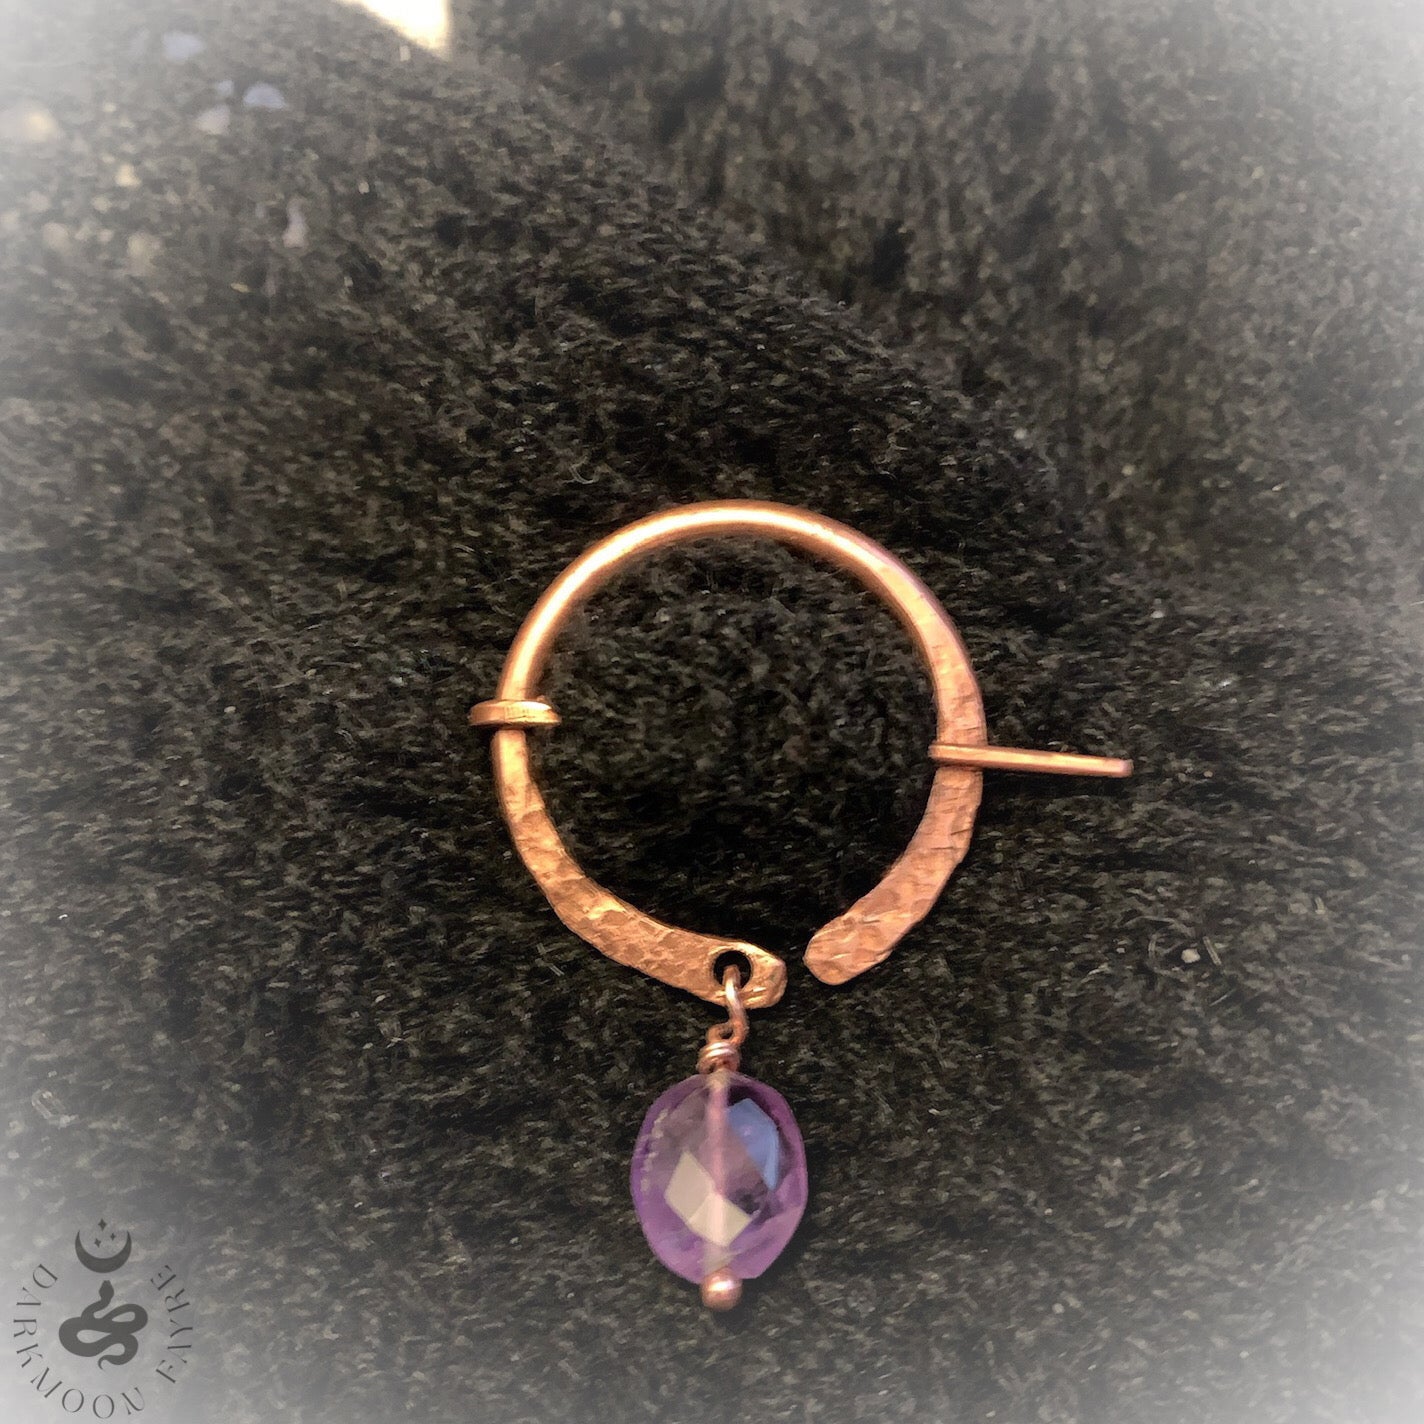 Iron Age Small Penannular Brooch In Bare Copper With An Amethyst Dangle Designed For Knitwear - Darkmoon Fayre